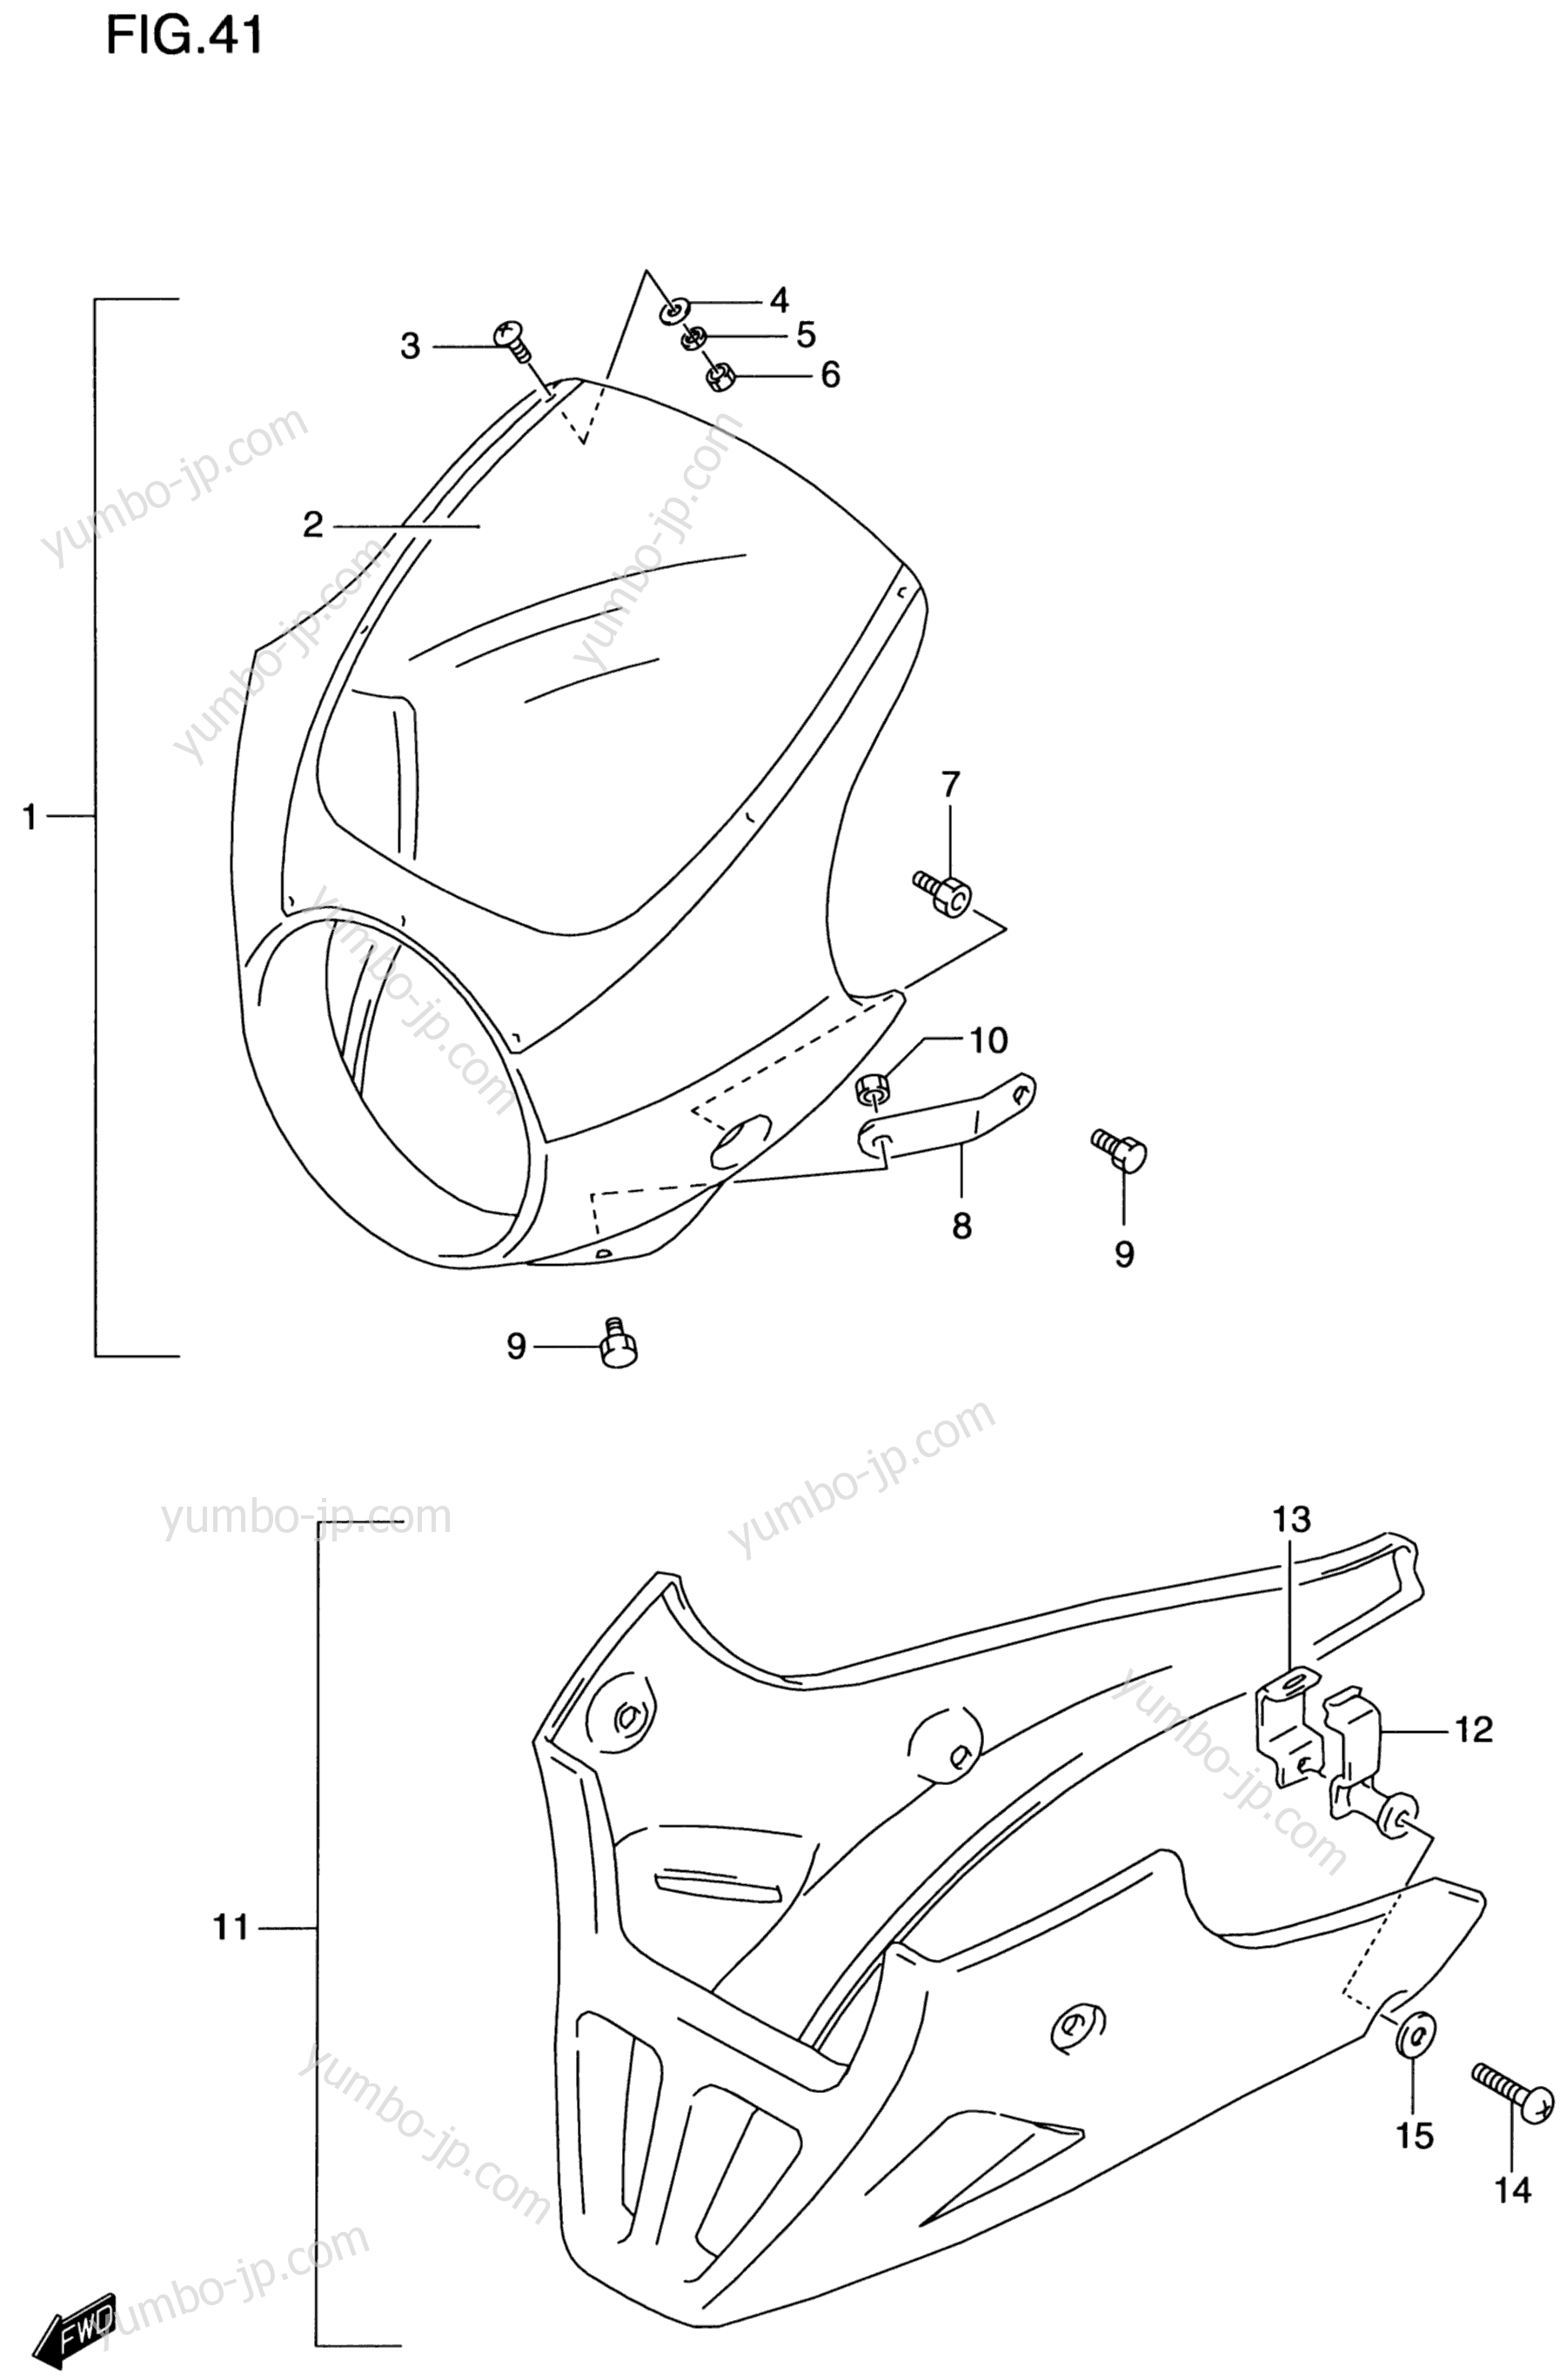 COWLING (OPTIONAL) for motorcycles SUZUKI GS500E 1997 year